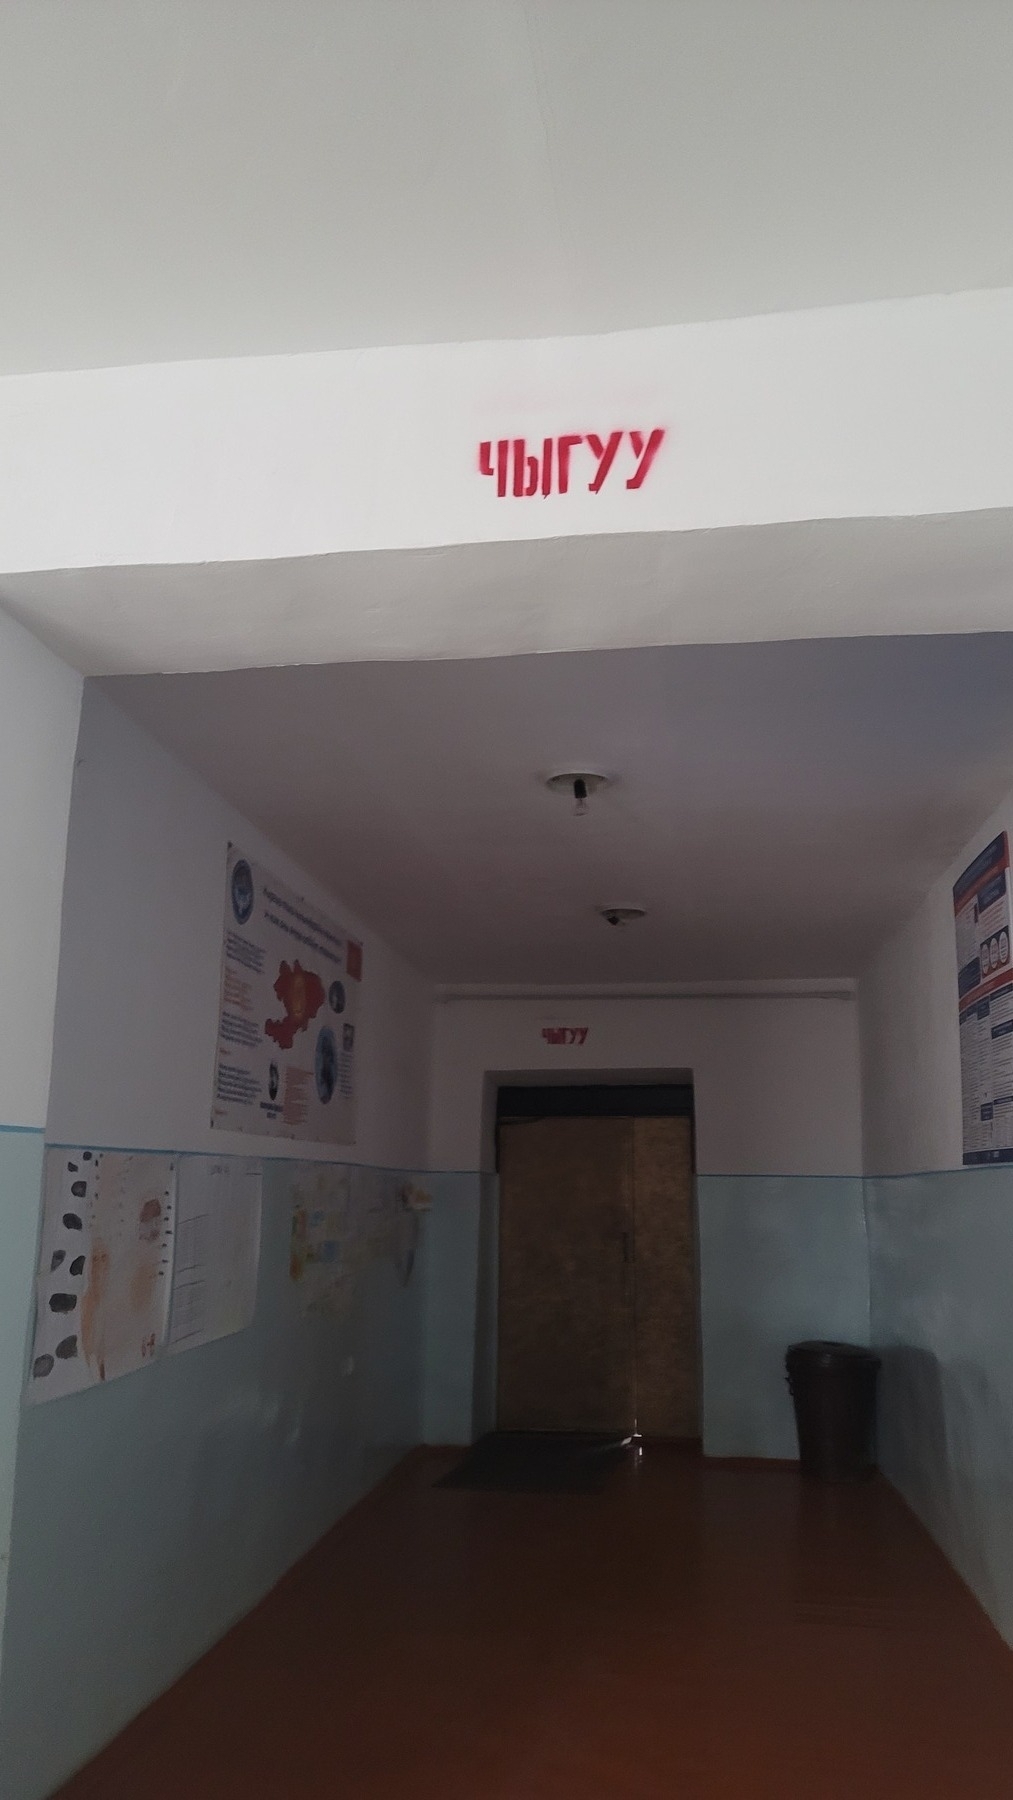 school hall with the Kyrgyz word for exit 'чыгуу' painted in red on a beam